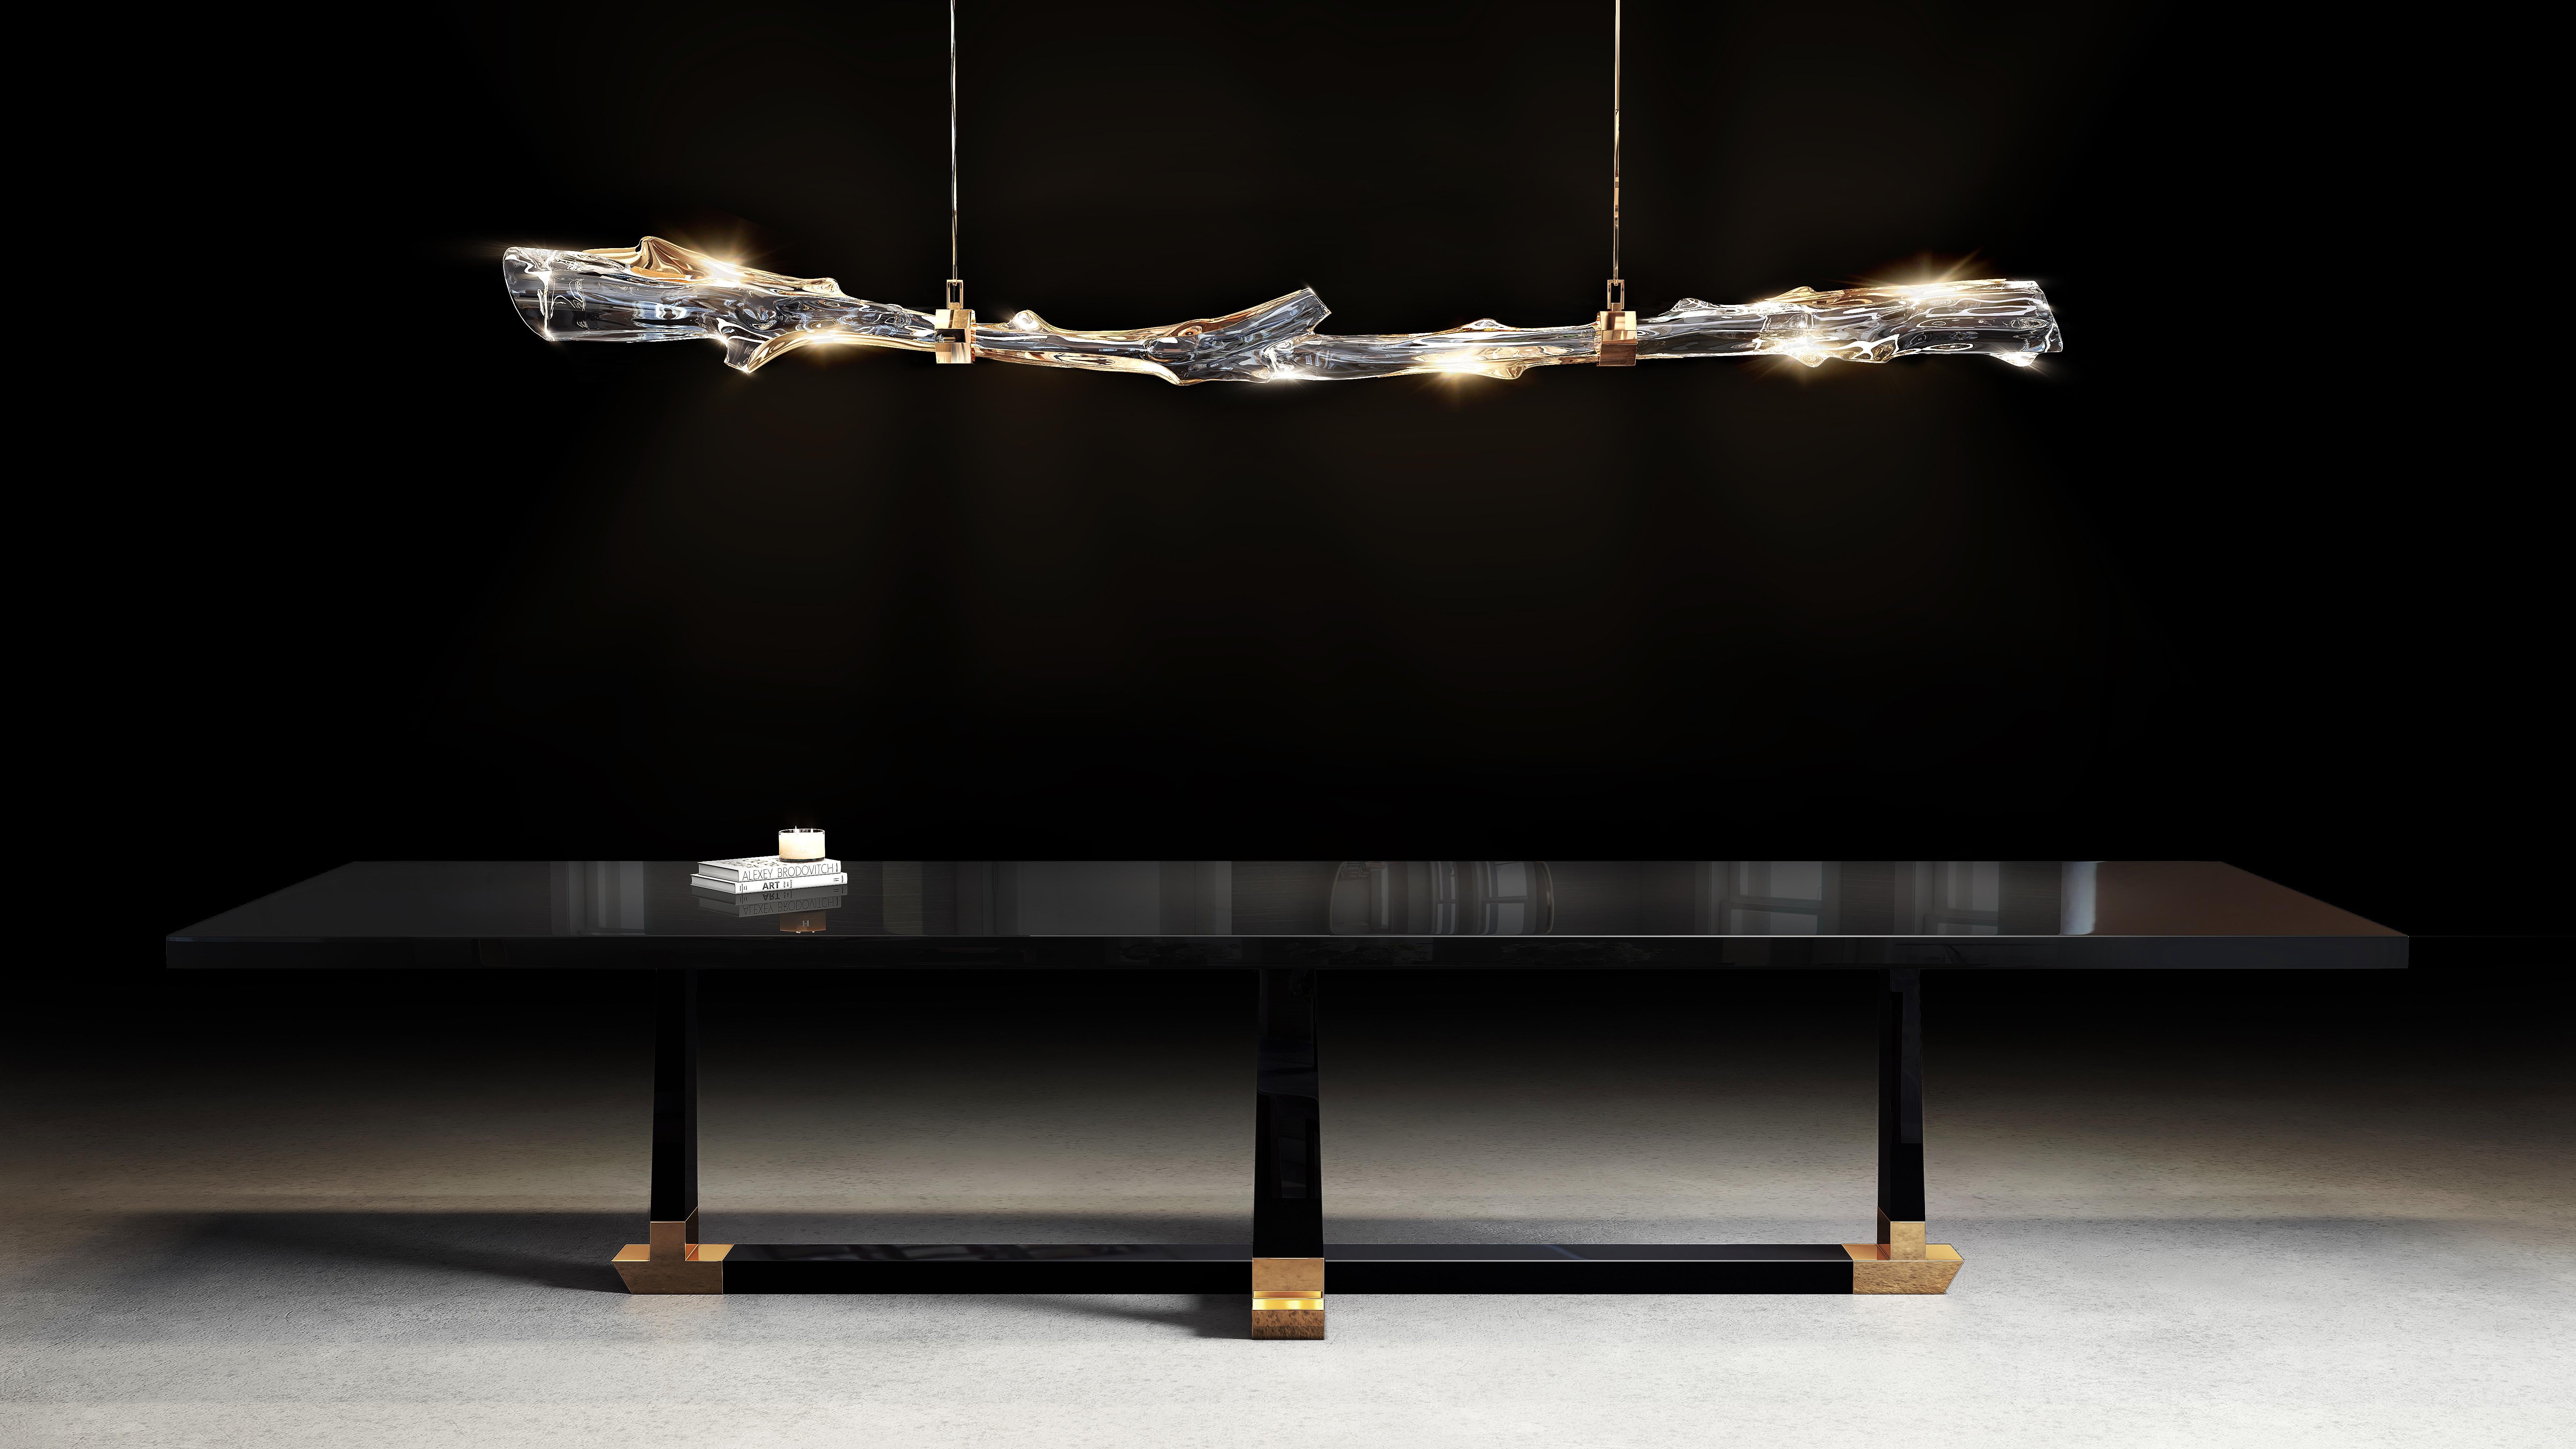 Introducing you to our first 2023 design, the Branch D’or Chandelier. A namesake, organic piece instigated by Barlas Baylar. The Branch D’or embraces a sturdy plexi acrylic glass branch with alternating tinges of bronze, complete with custom bronze